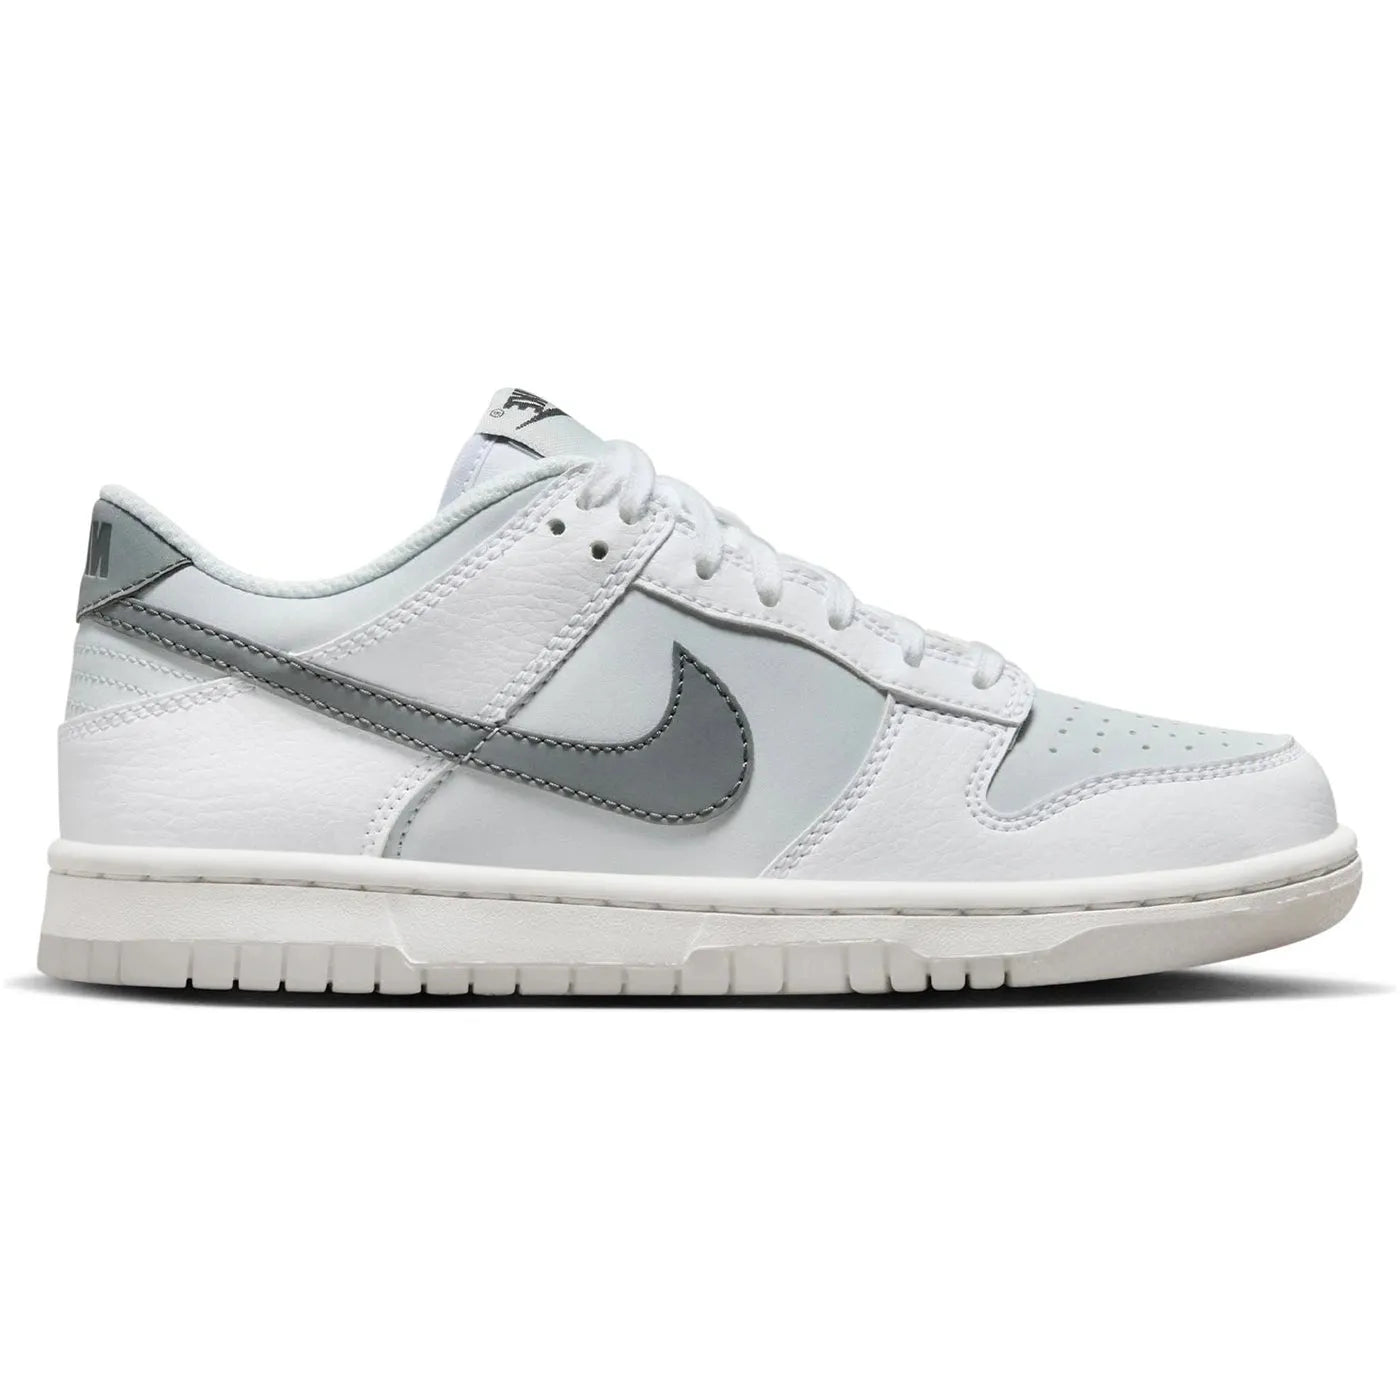 Nike Dunk Low Reflective Swoosh White (GS) | Soleply